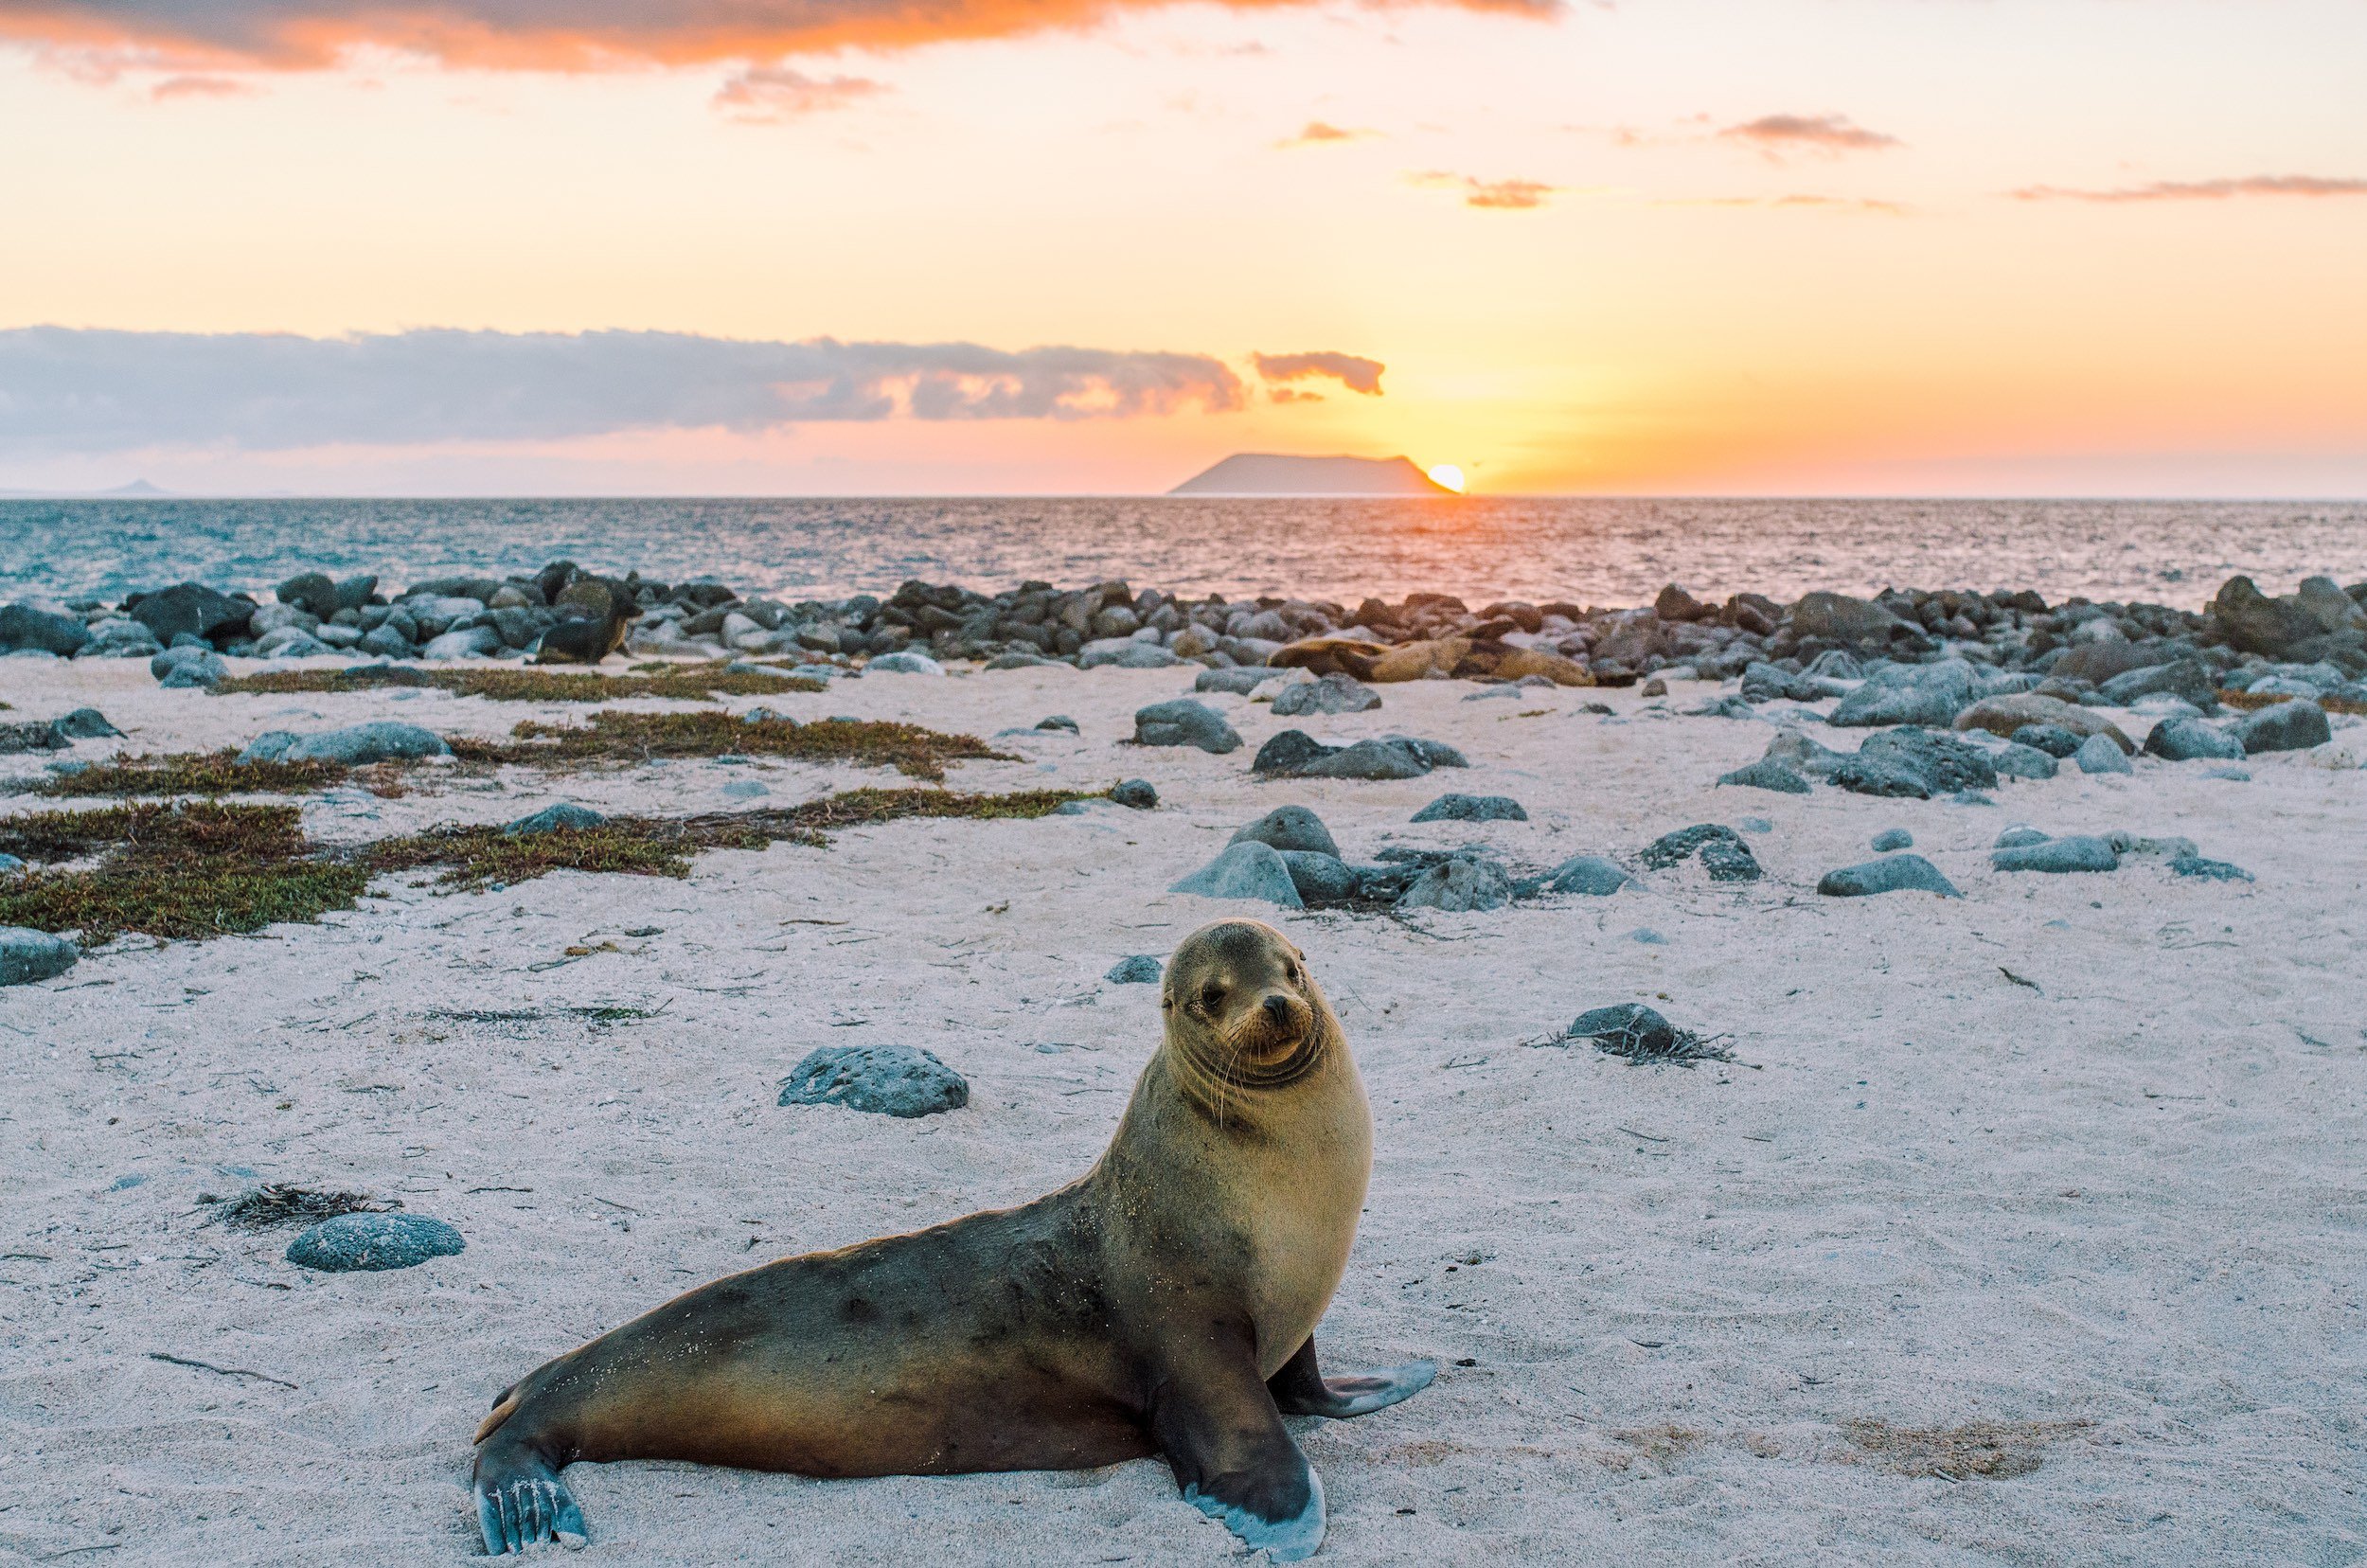 Sea-lion and sunset in the Galapagos Islands.jpg